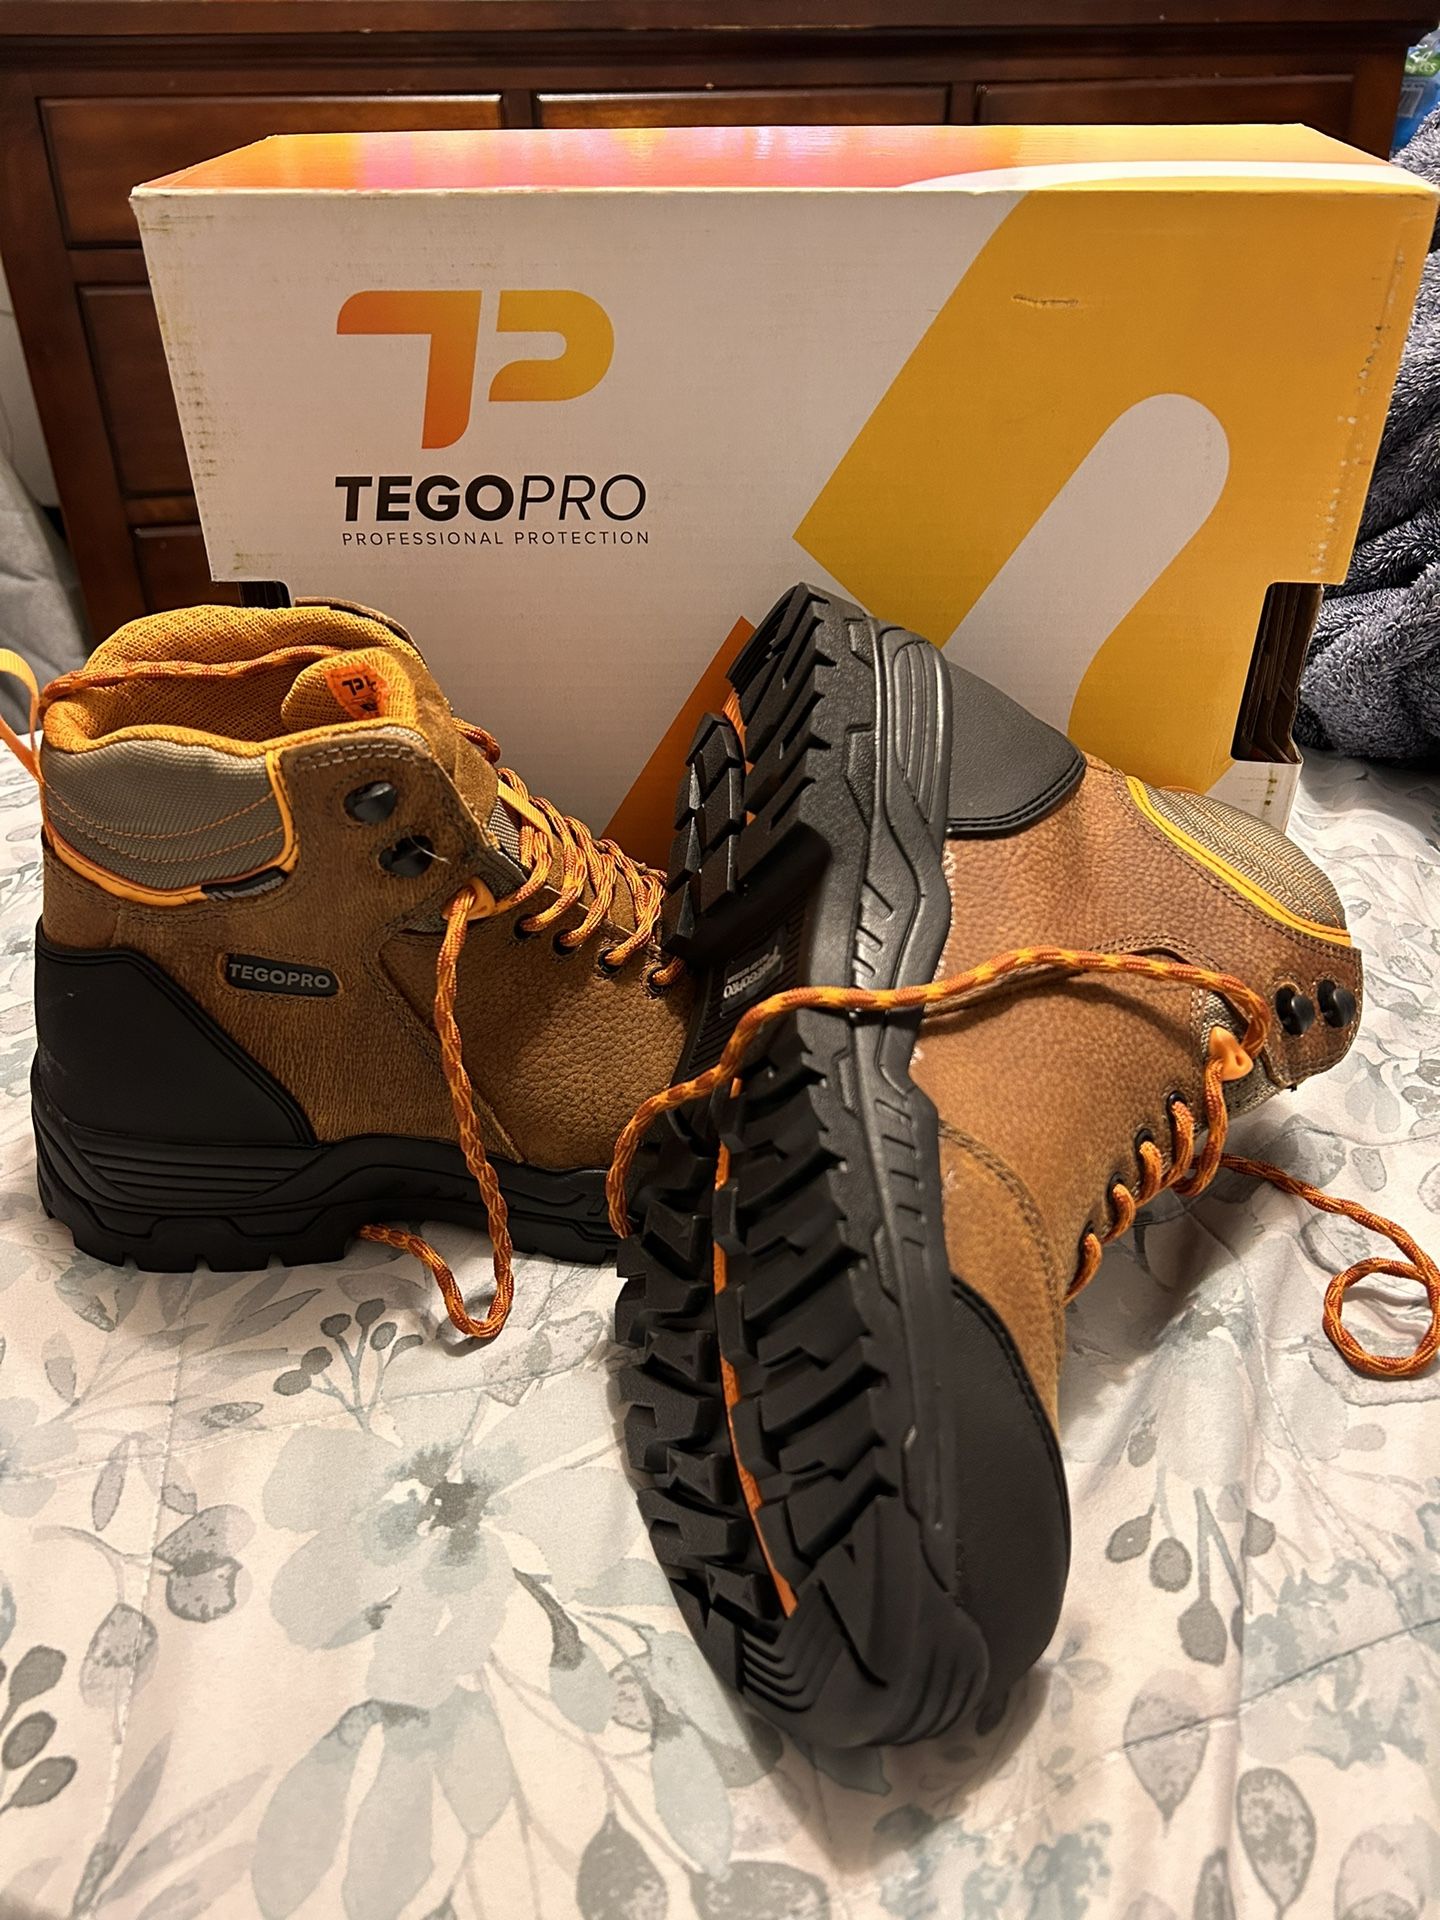 TEGOpro work boots